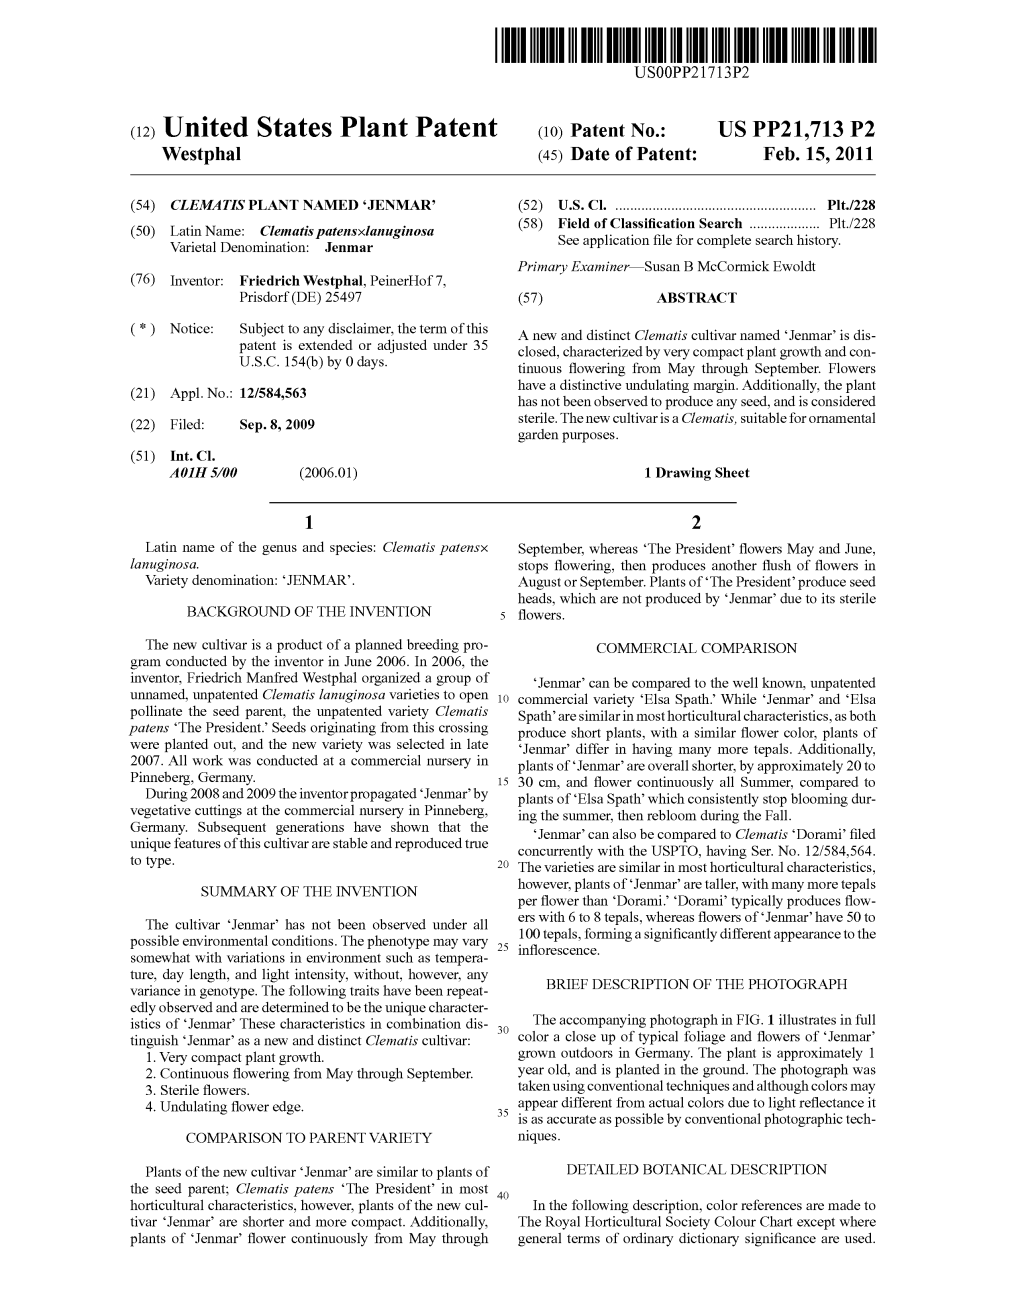 (12) United States Plant Patent (10) Patent N0.: US PP21,713 P2 Westphal (45) Date of Patent: Feb